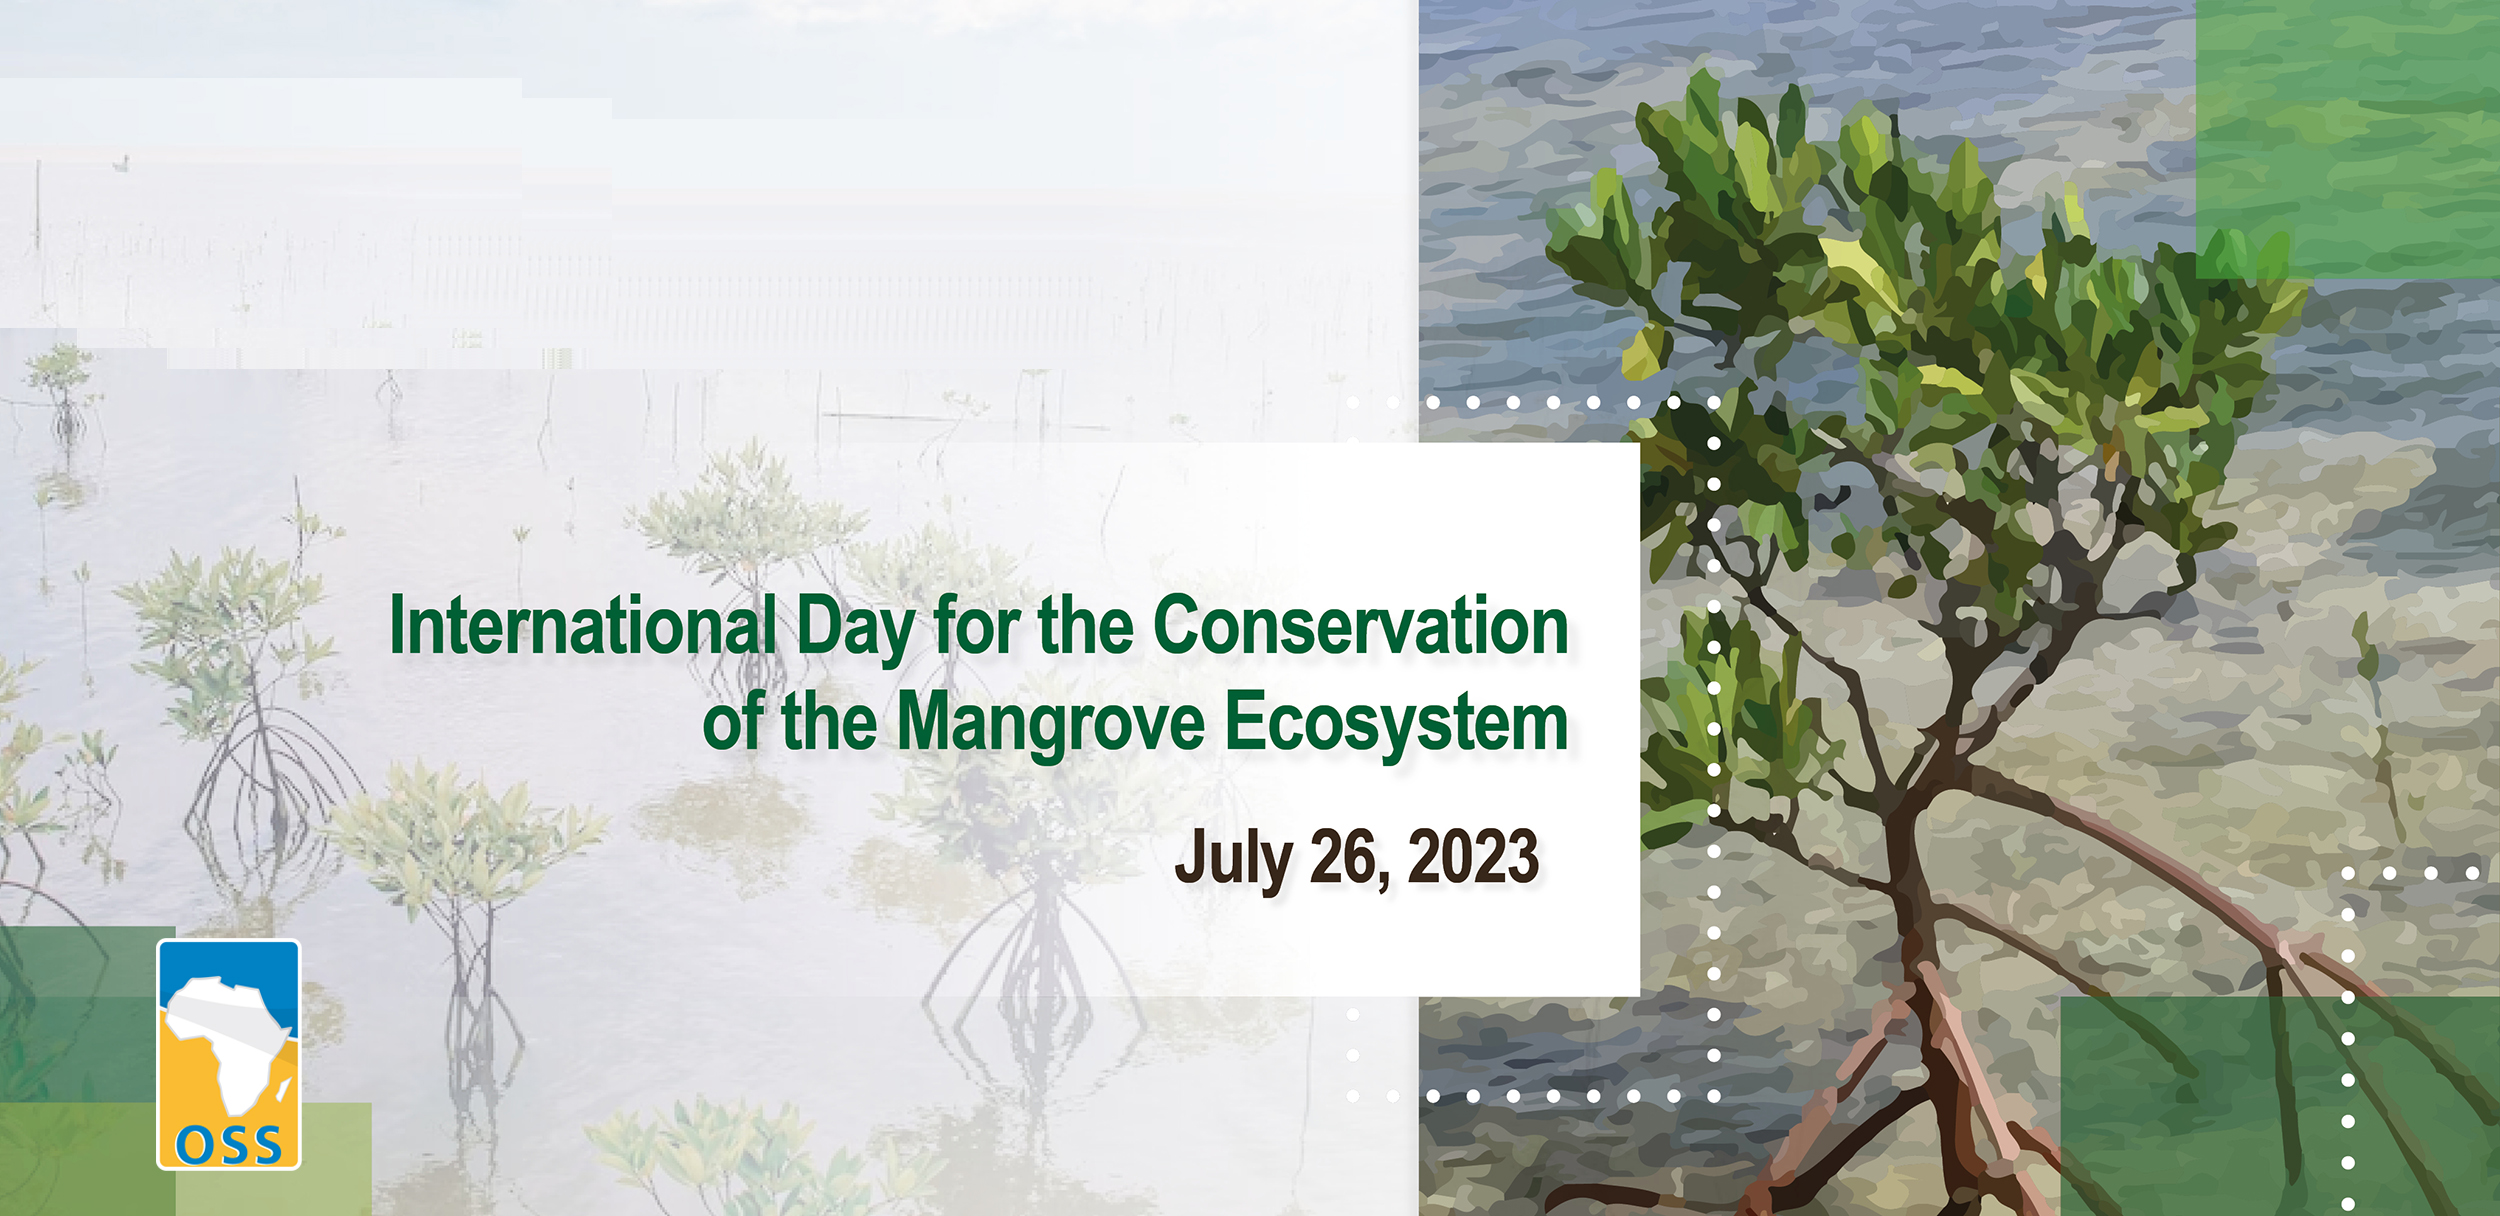 The International Day for the Conservation of the Mangrove Ecosystem